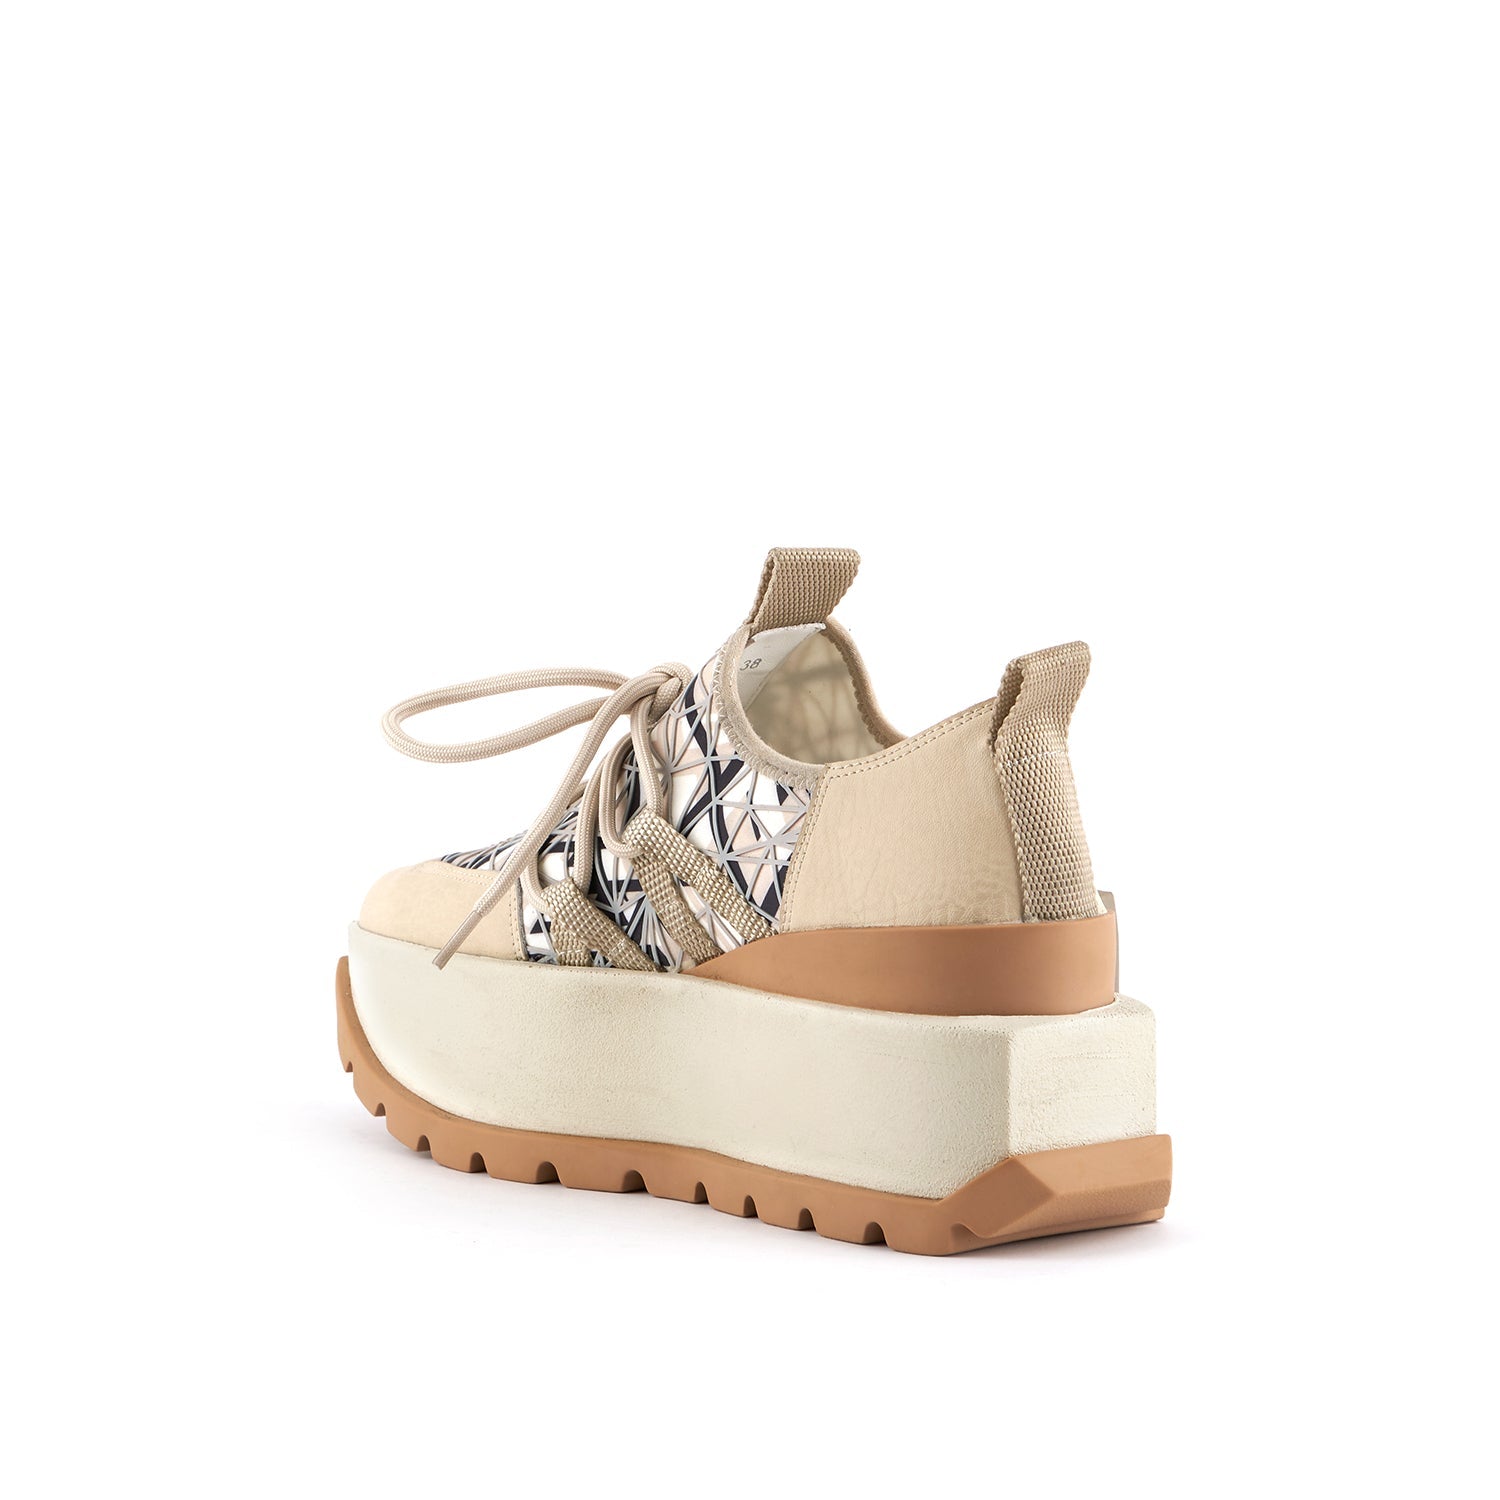 inner back side view of the united nude roko hype sneaker in the color beige/natural. This sneaker has a wedge platform sole, a lace up front, and a black and white geometric design.